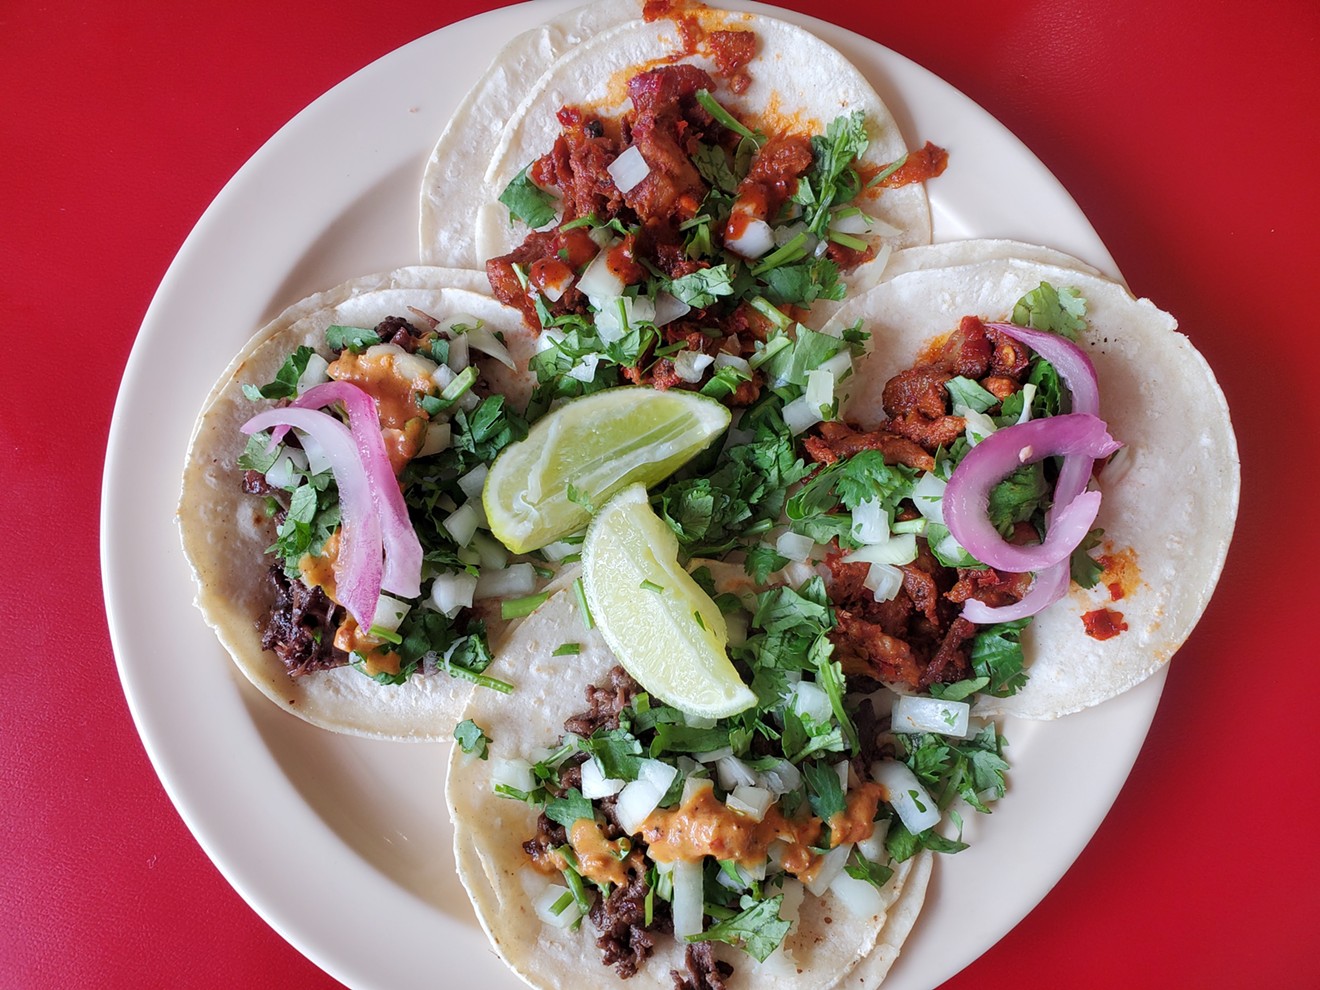 Tacos Selene now has a location in Denver.